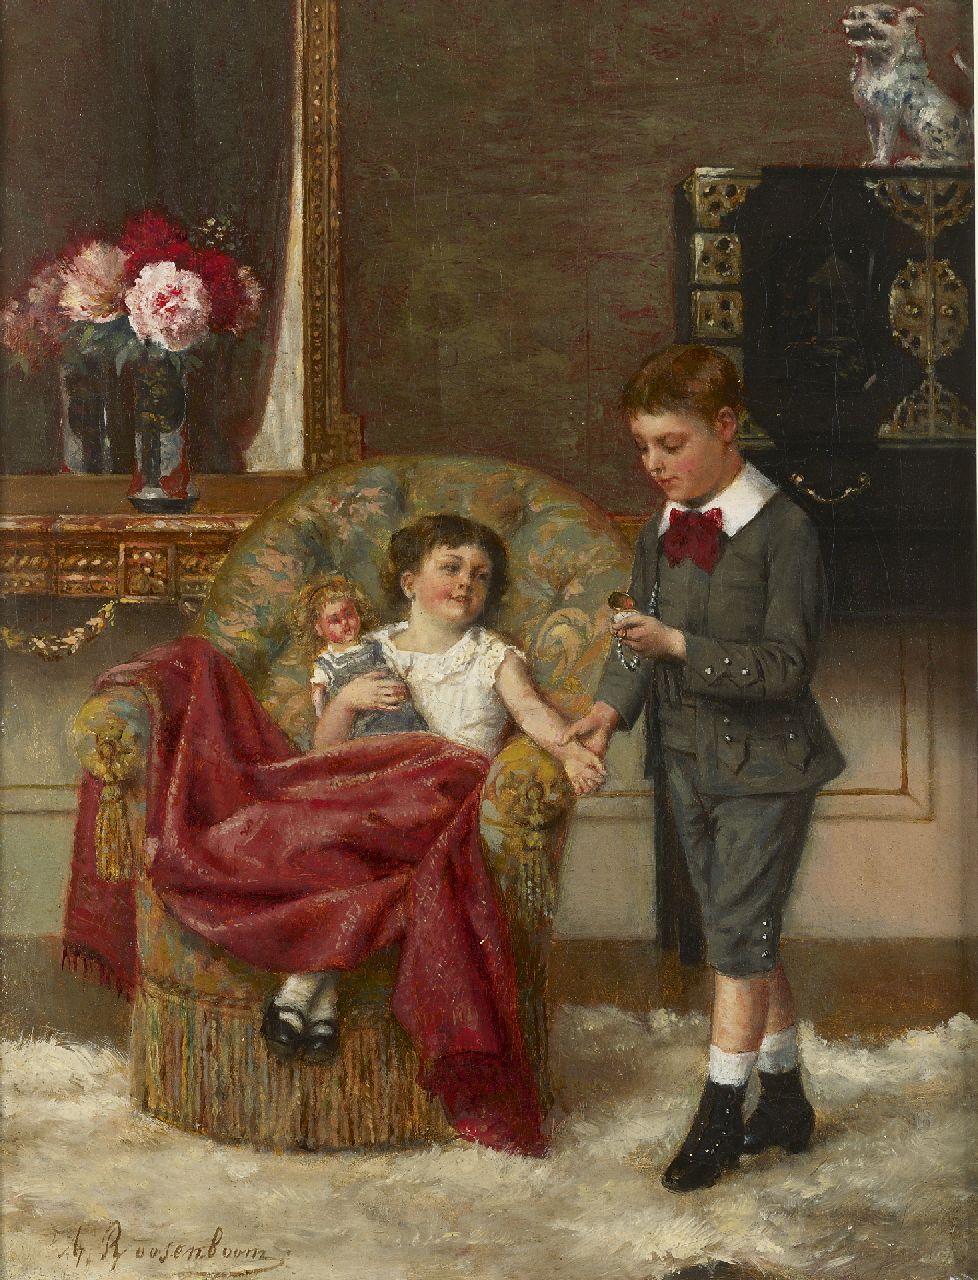 Roosenboom A.  | Albert Roosenboom, The young doctor, oil on canvas 34.0 x 25.7 cm, signed l.l. and dated 1887 on the reverse